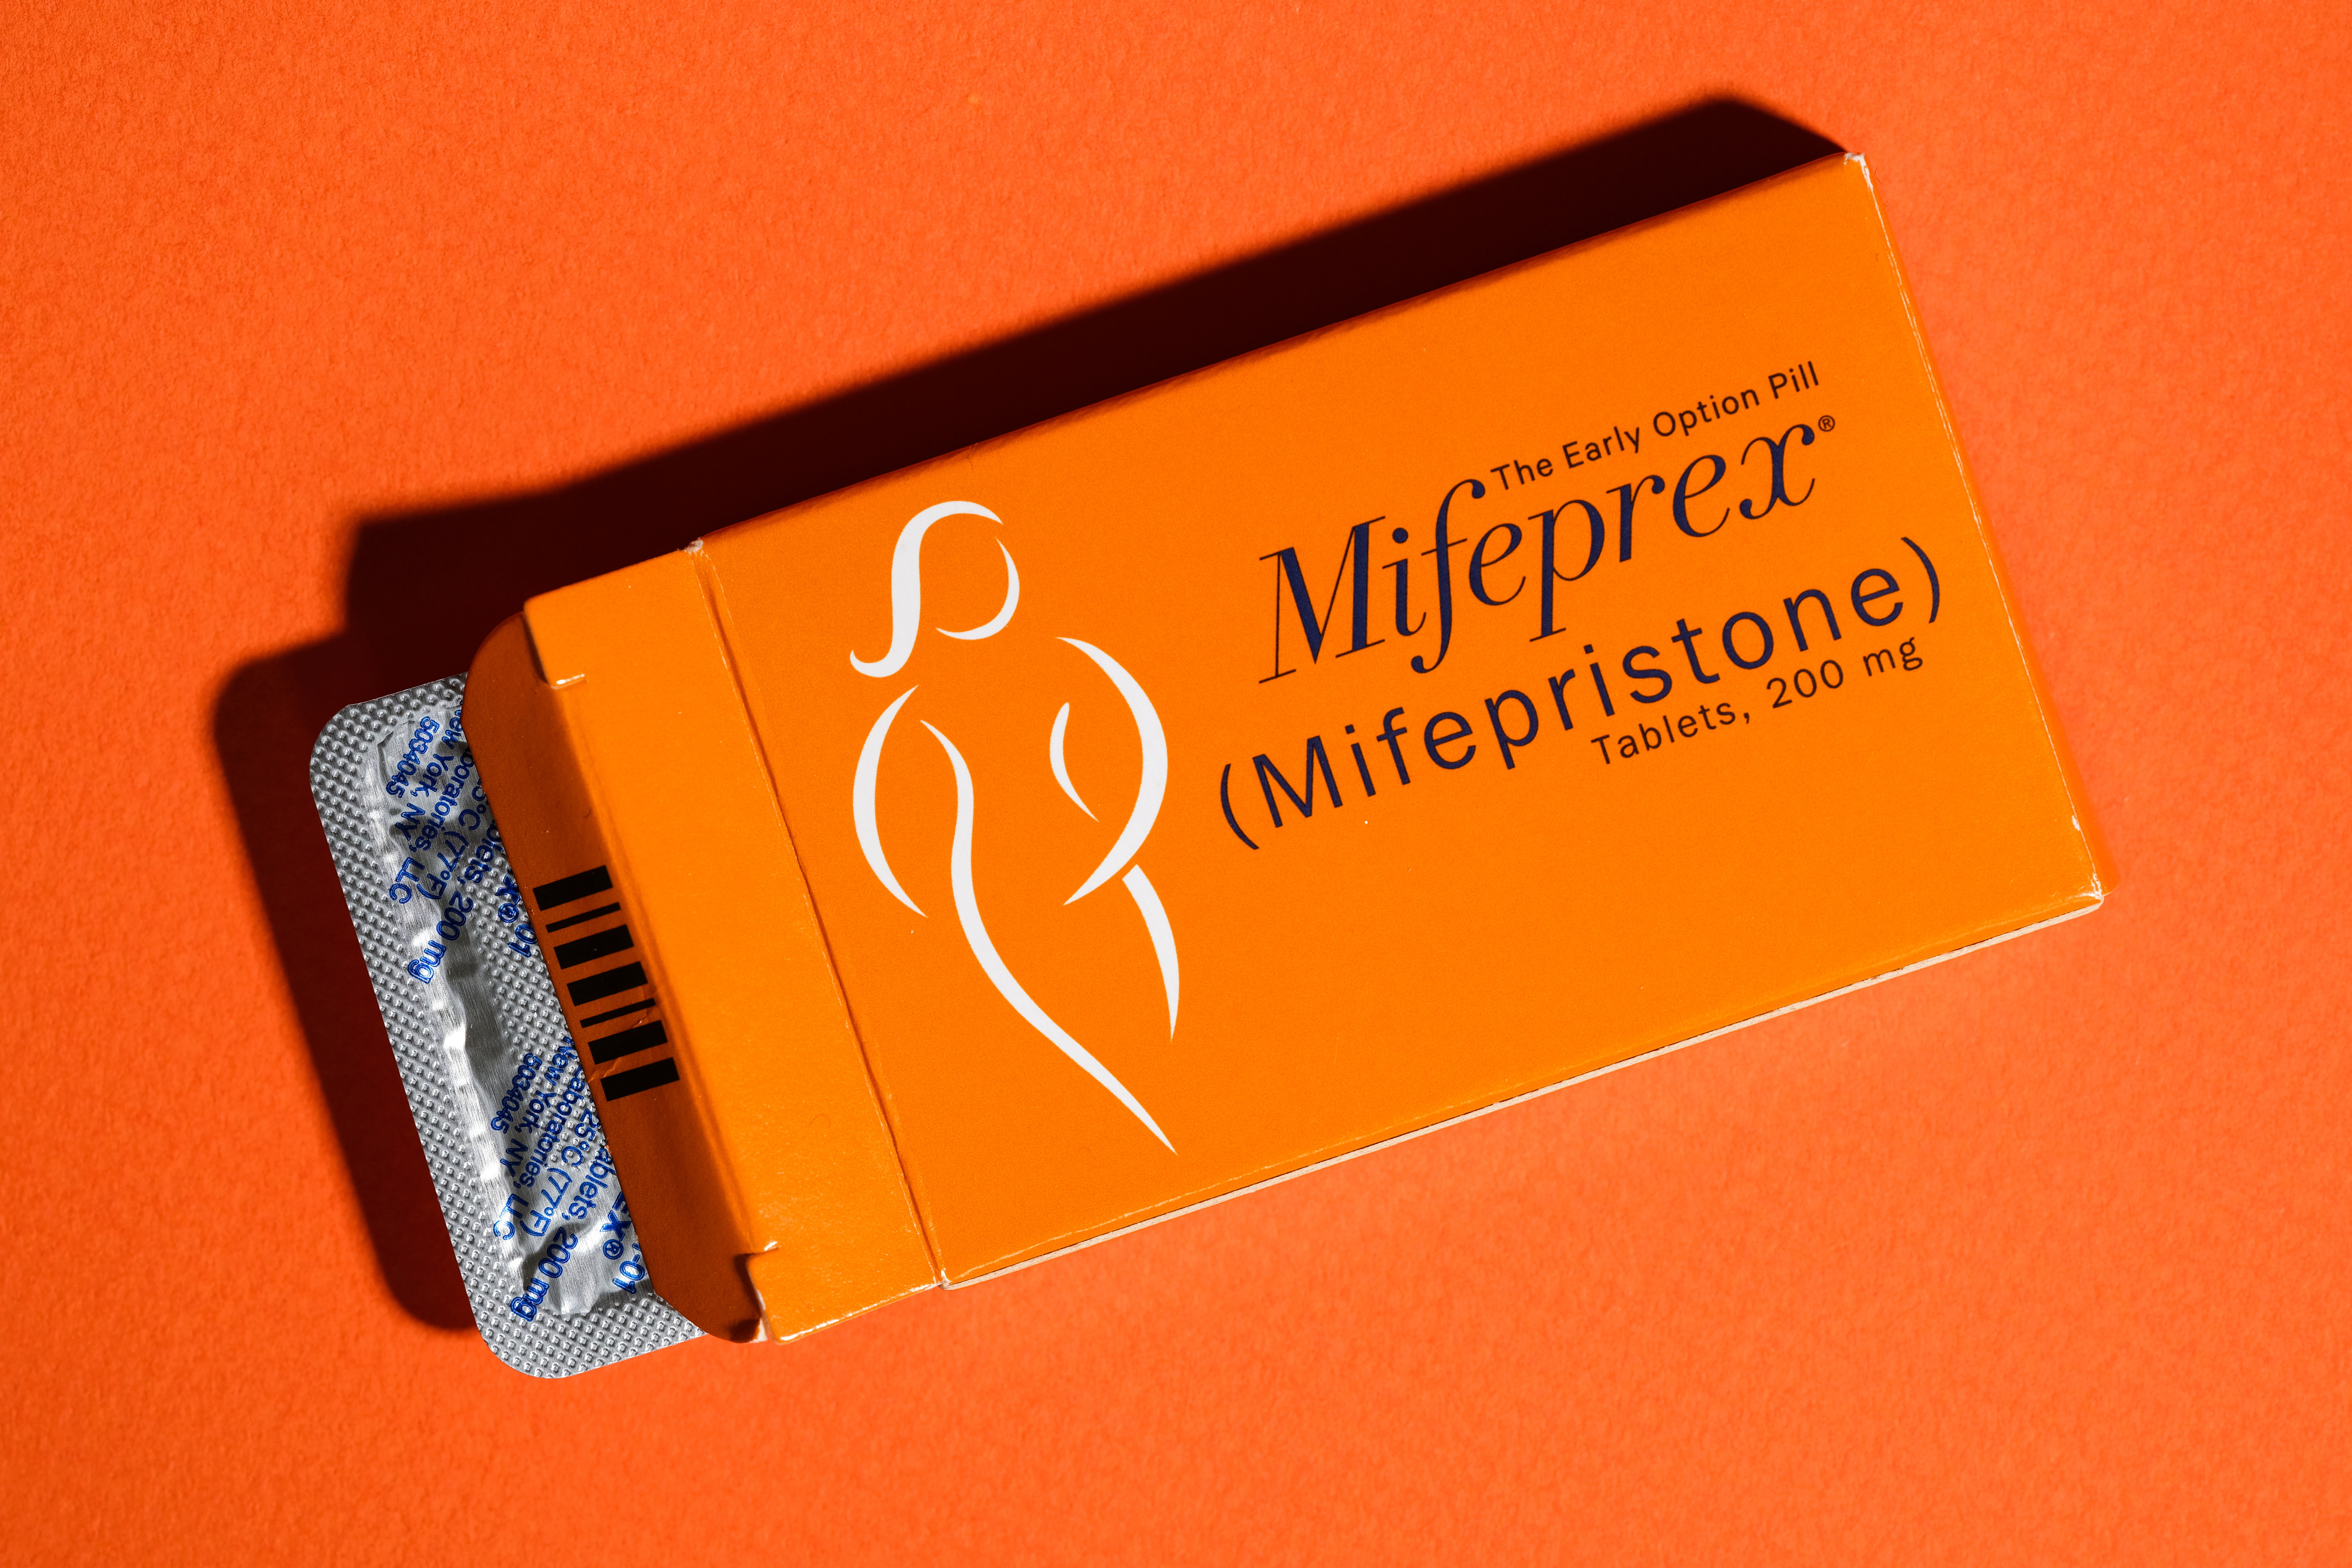 A pack of Mifeprex pills, used to terminate early pregnancies, is displayed in this picture illustration